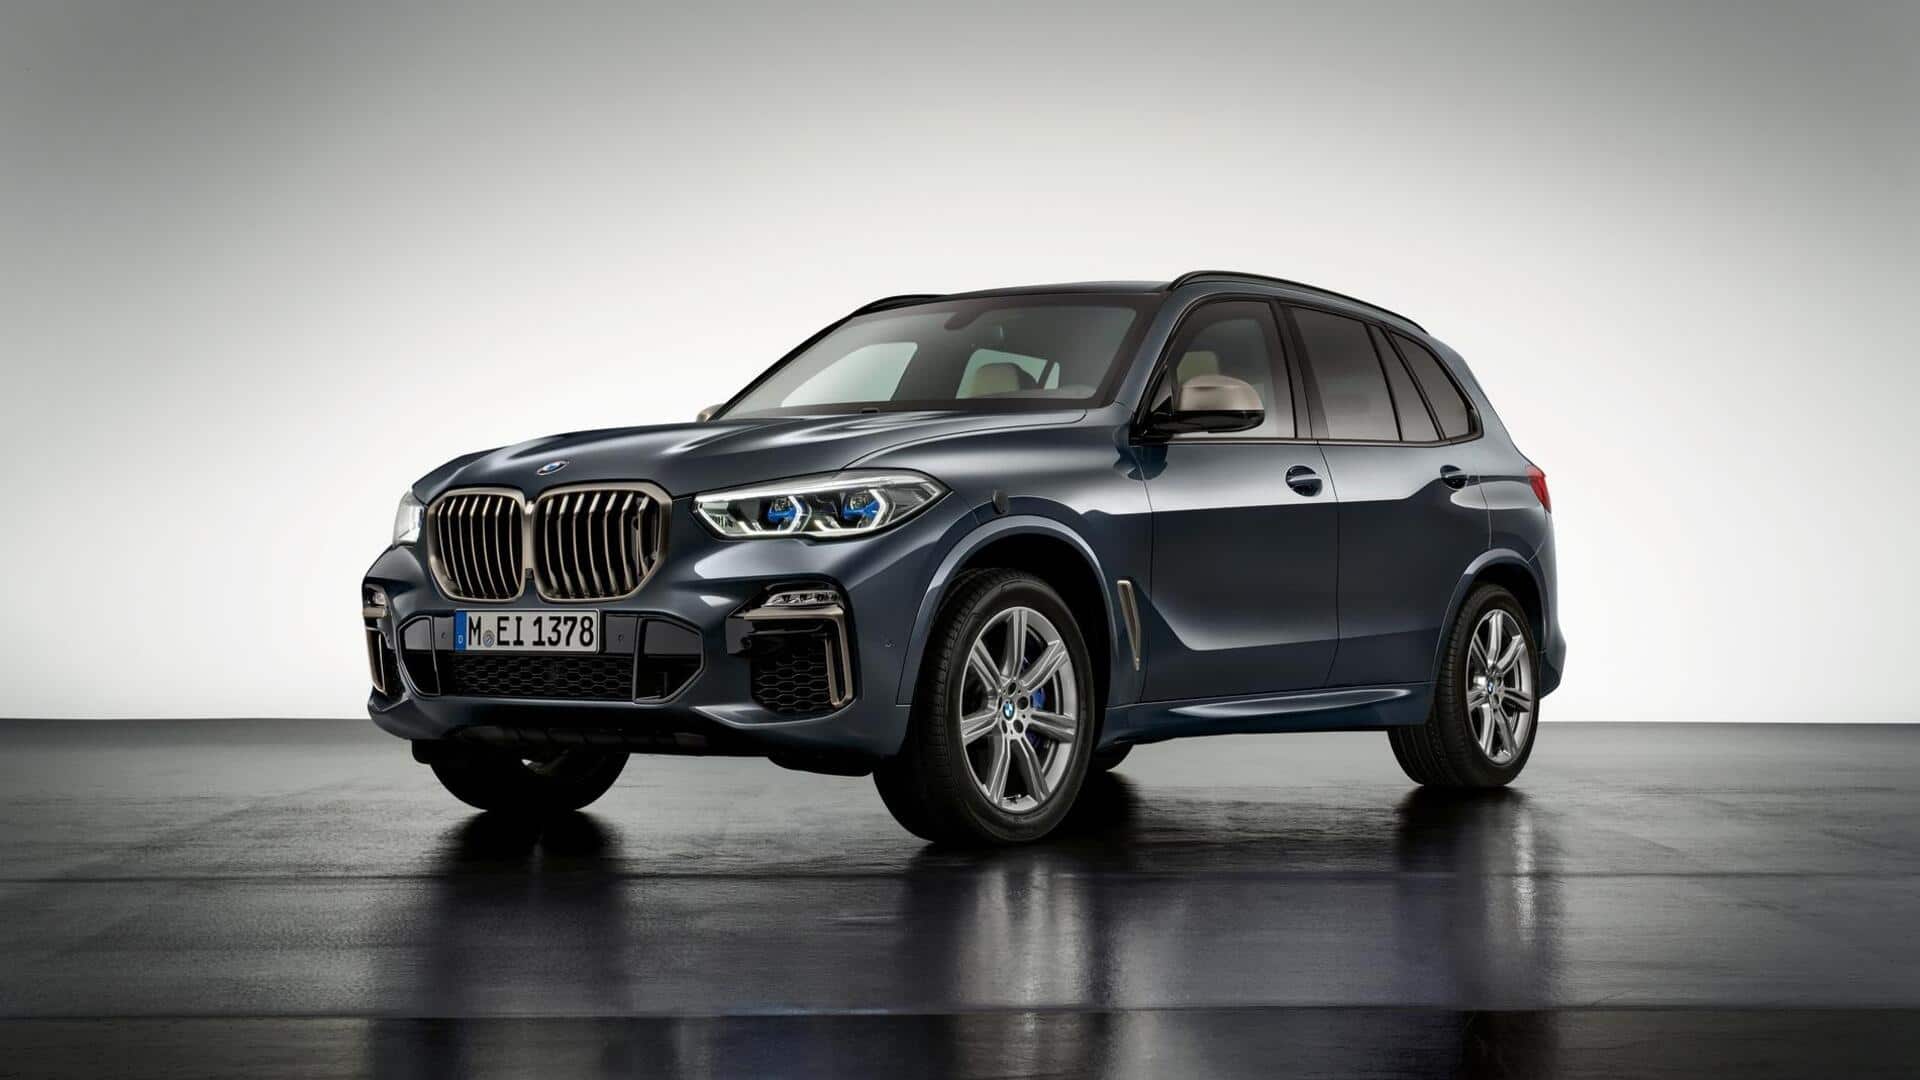 This BMW X5 SUV can survive blasts